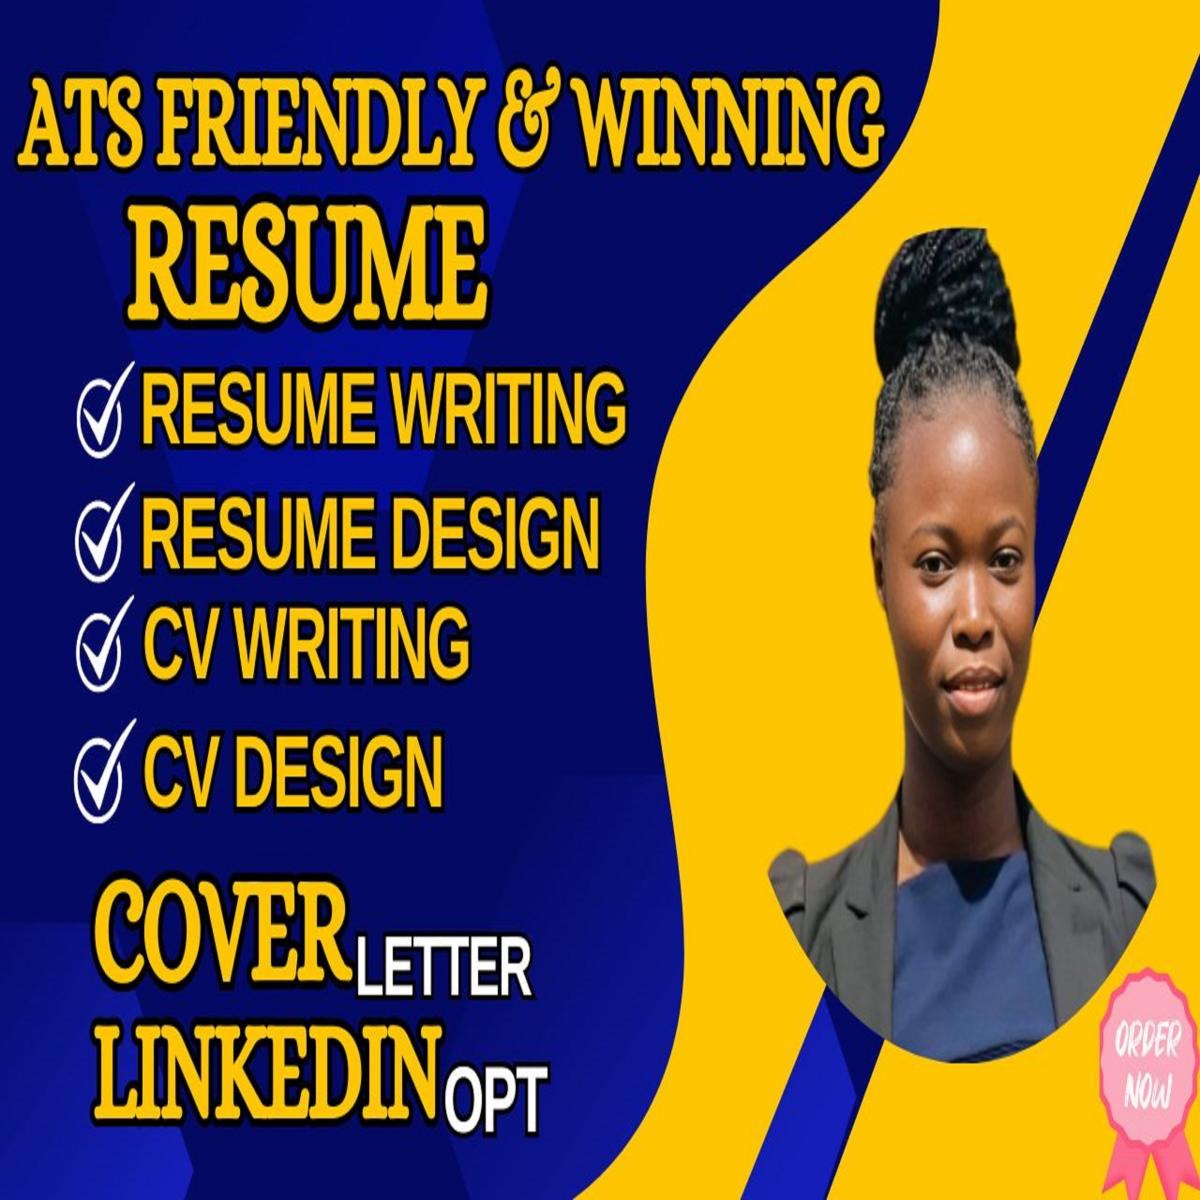 I will provide professional ATS resume writing services